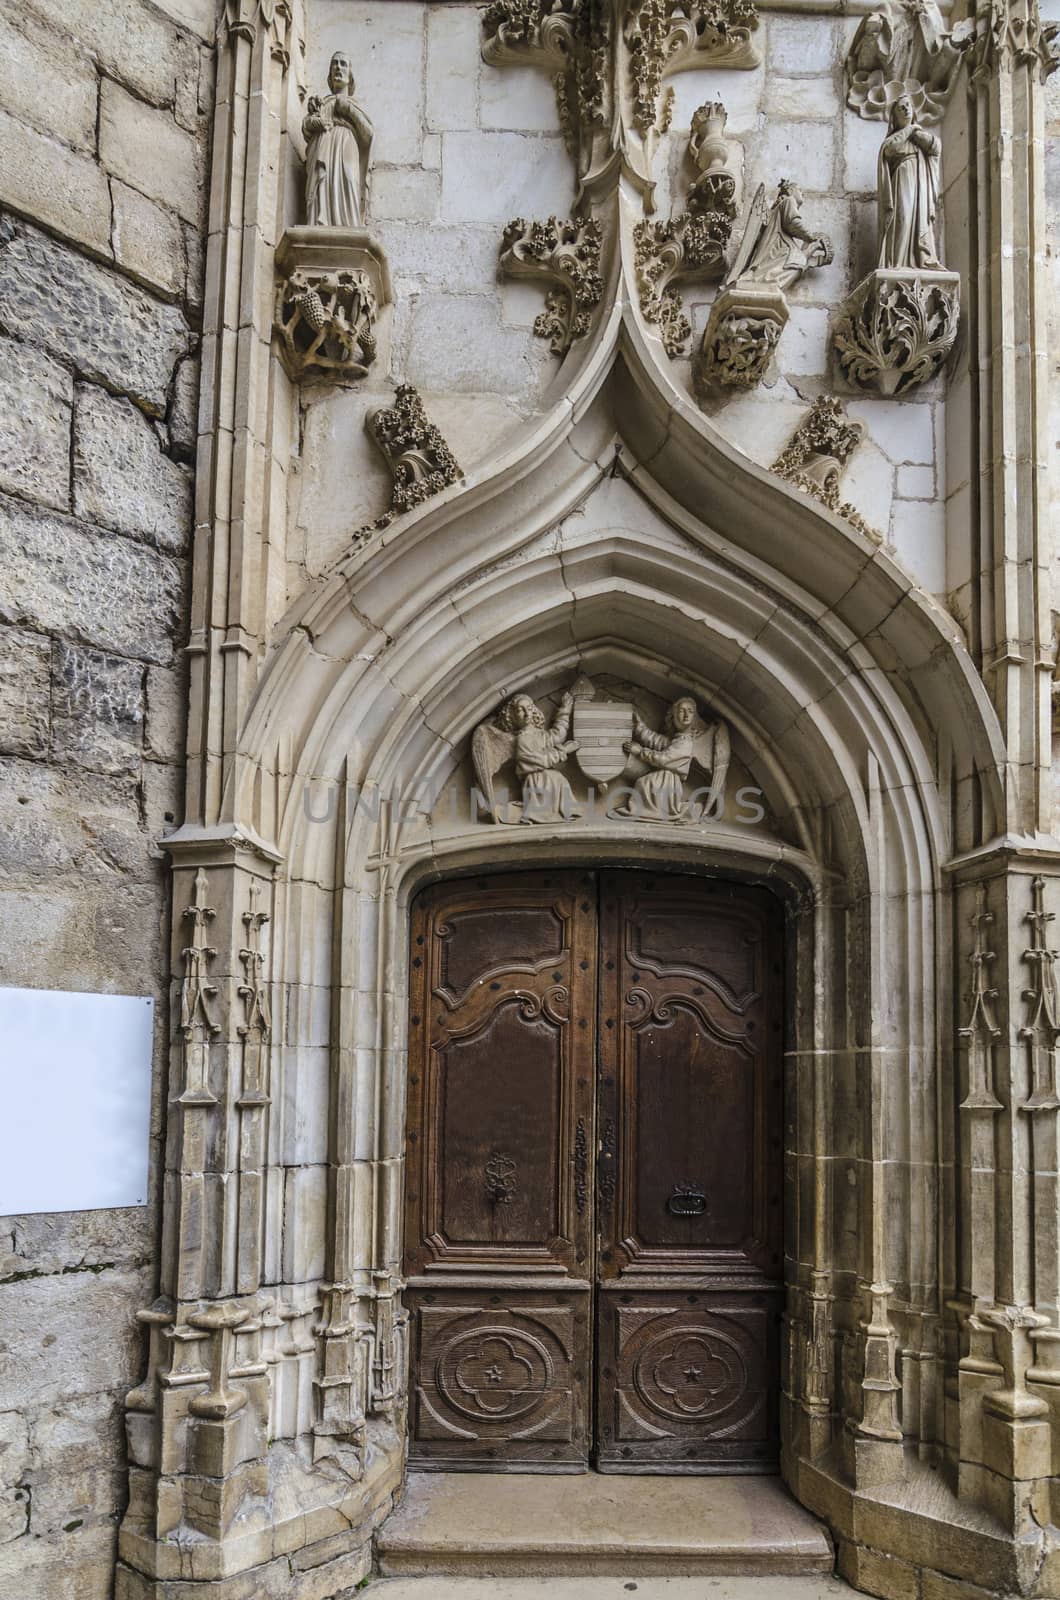 Artistic and sculptural details on the entrance doors to the chapel of the sanctuary of Rocamadour